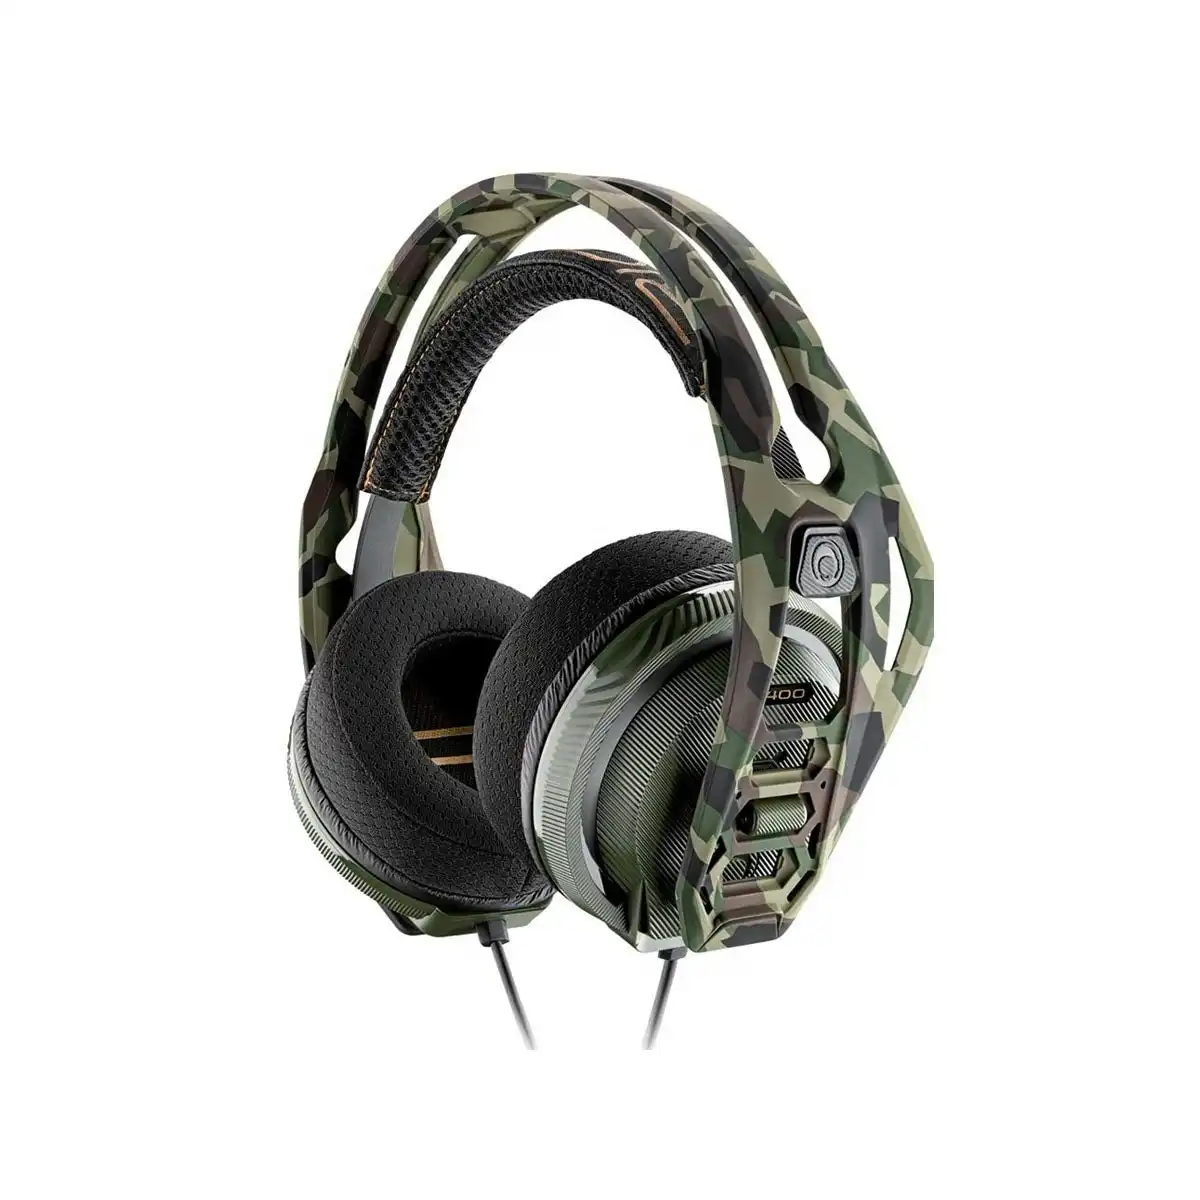 RIG 400 HA Forest Camo V2 Gaming Headset For PlayStation 4 and PlayStation 5